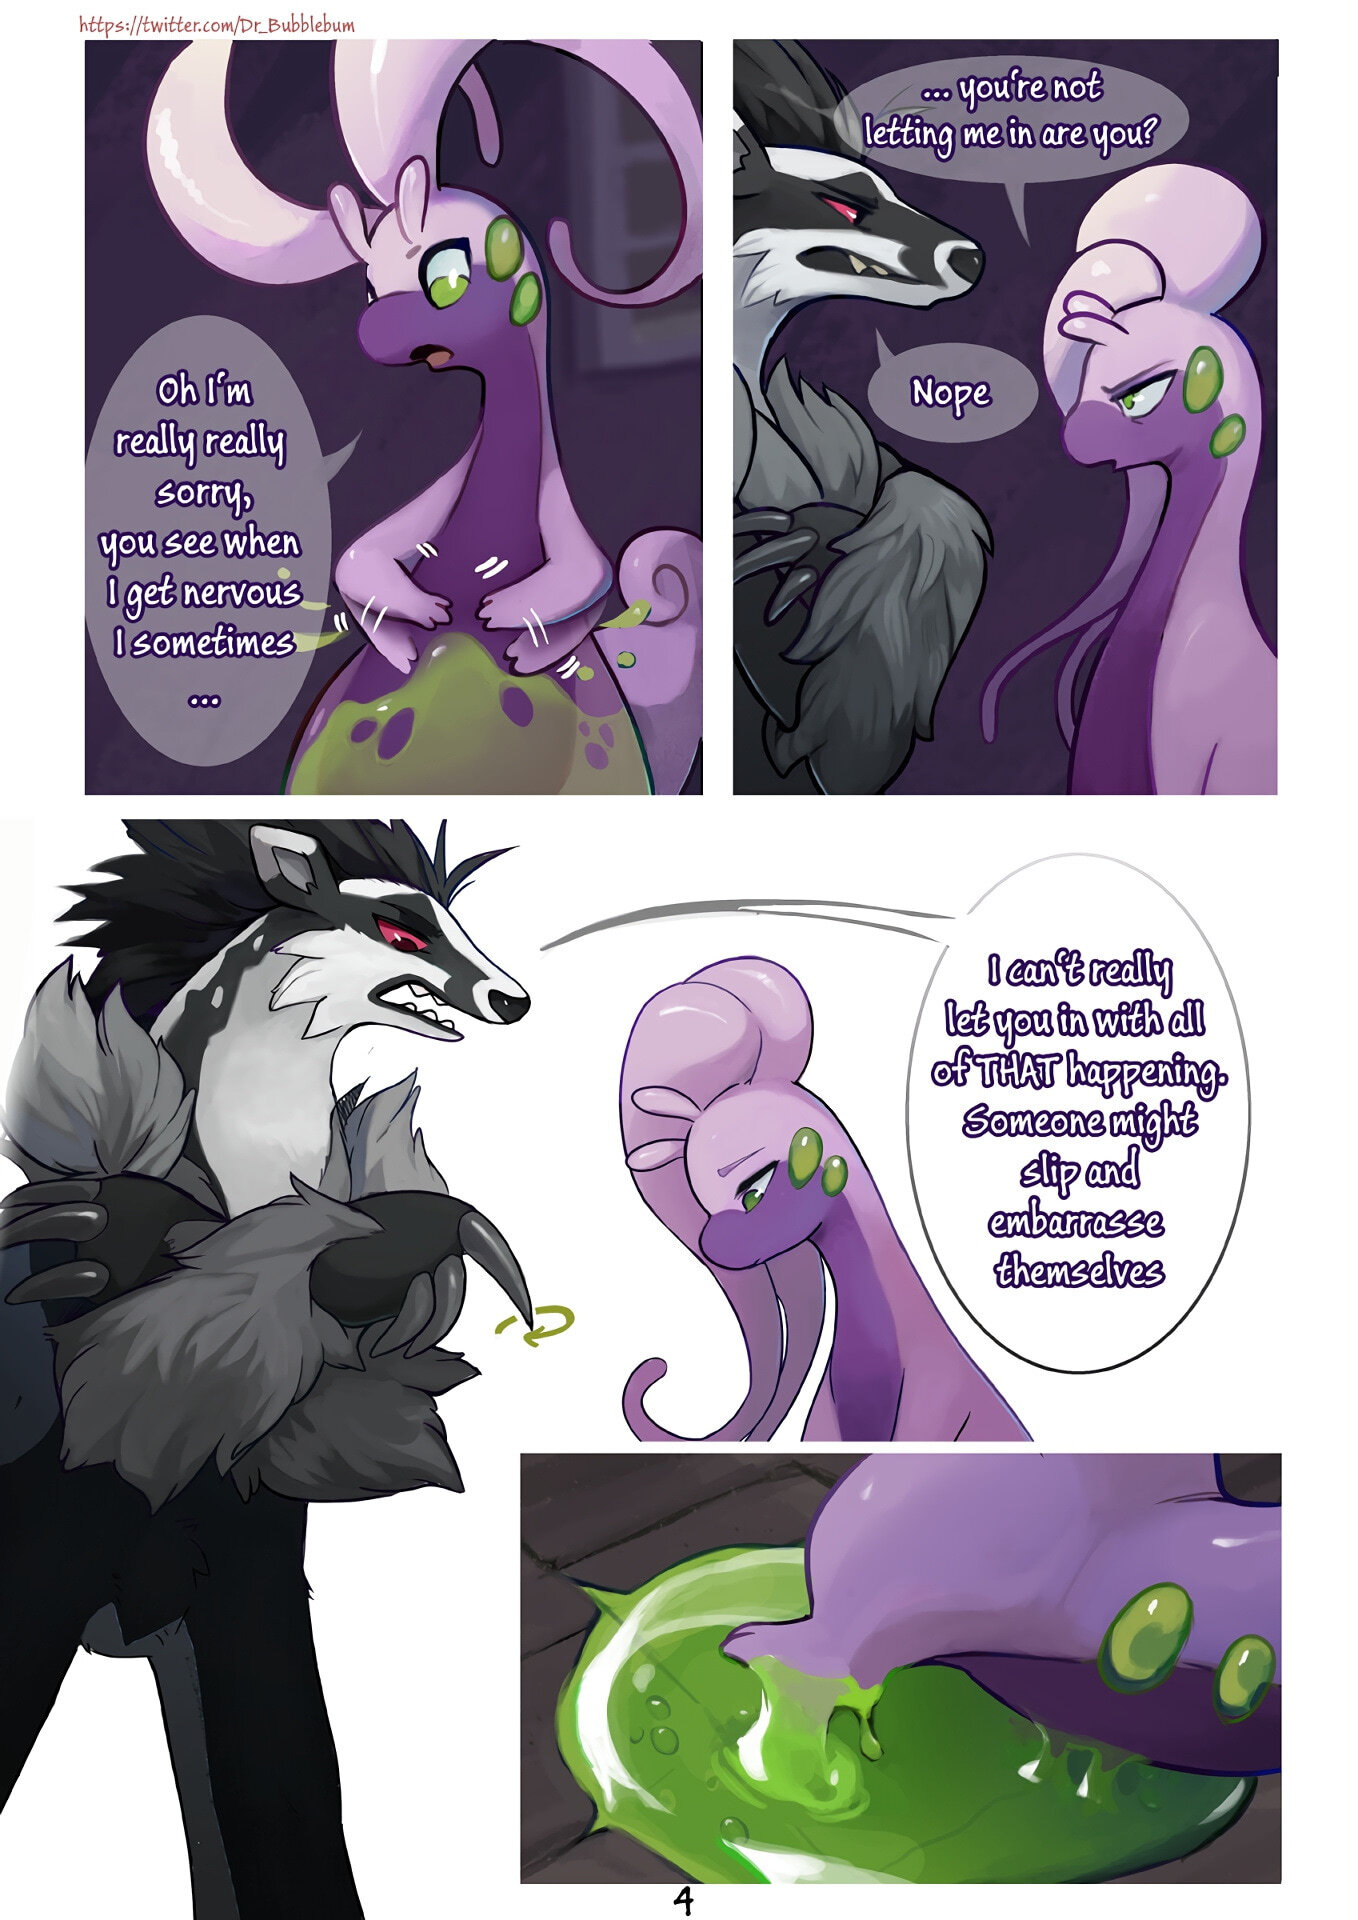 Getting in! - Page 4